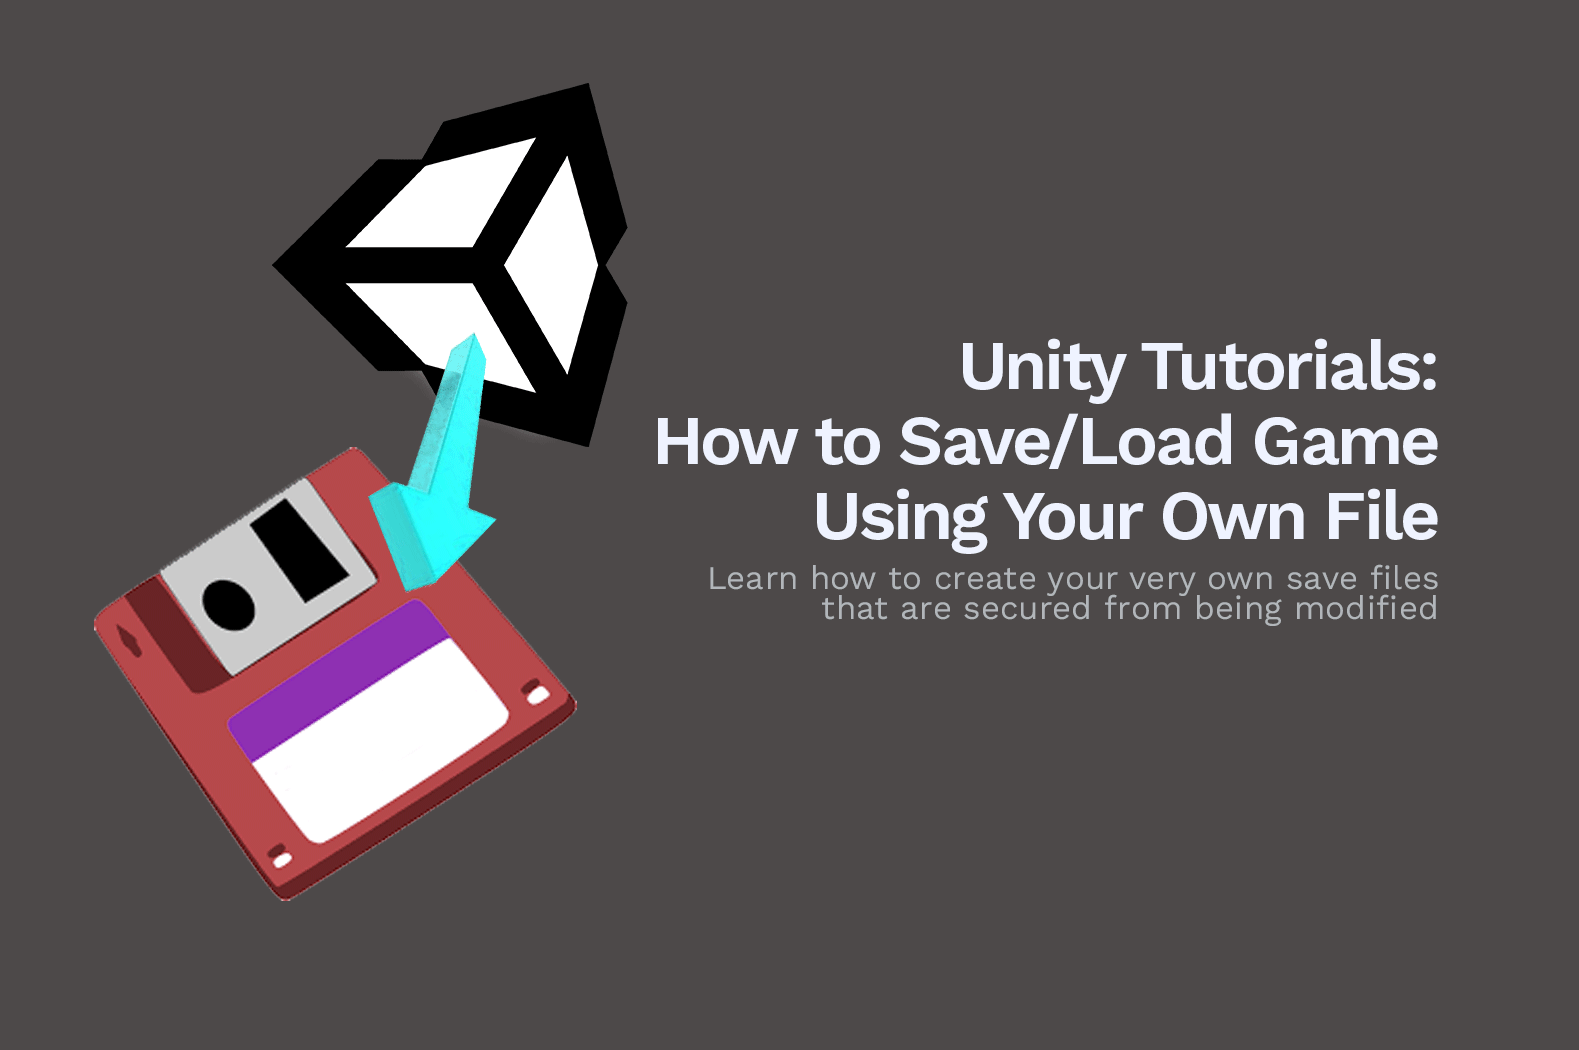 Unity Tutorials: How to Save/Load Game Using Your Own File